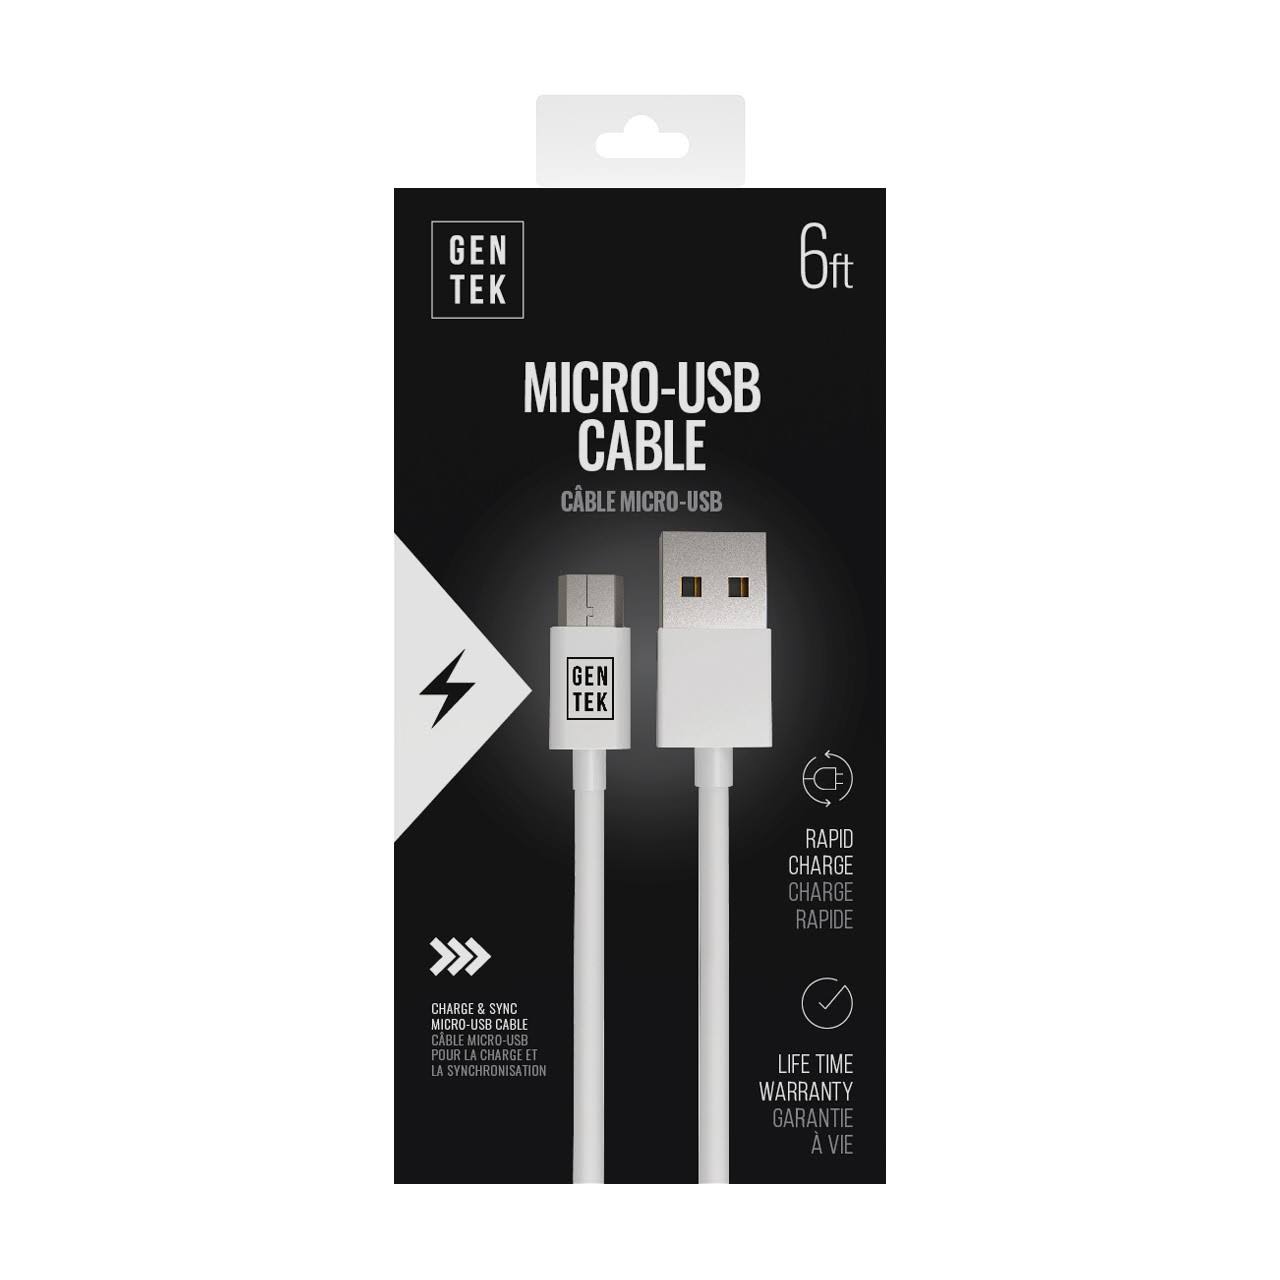 Gen Tek Micro USB to USB Charging Cable